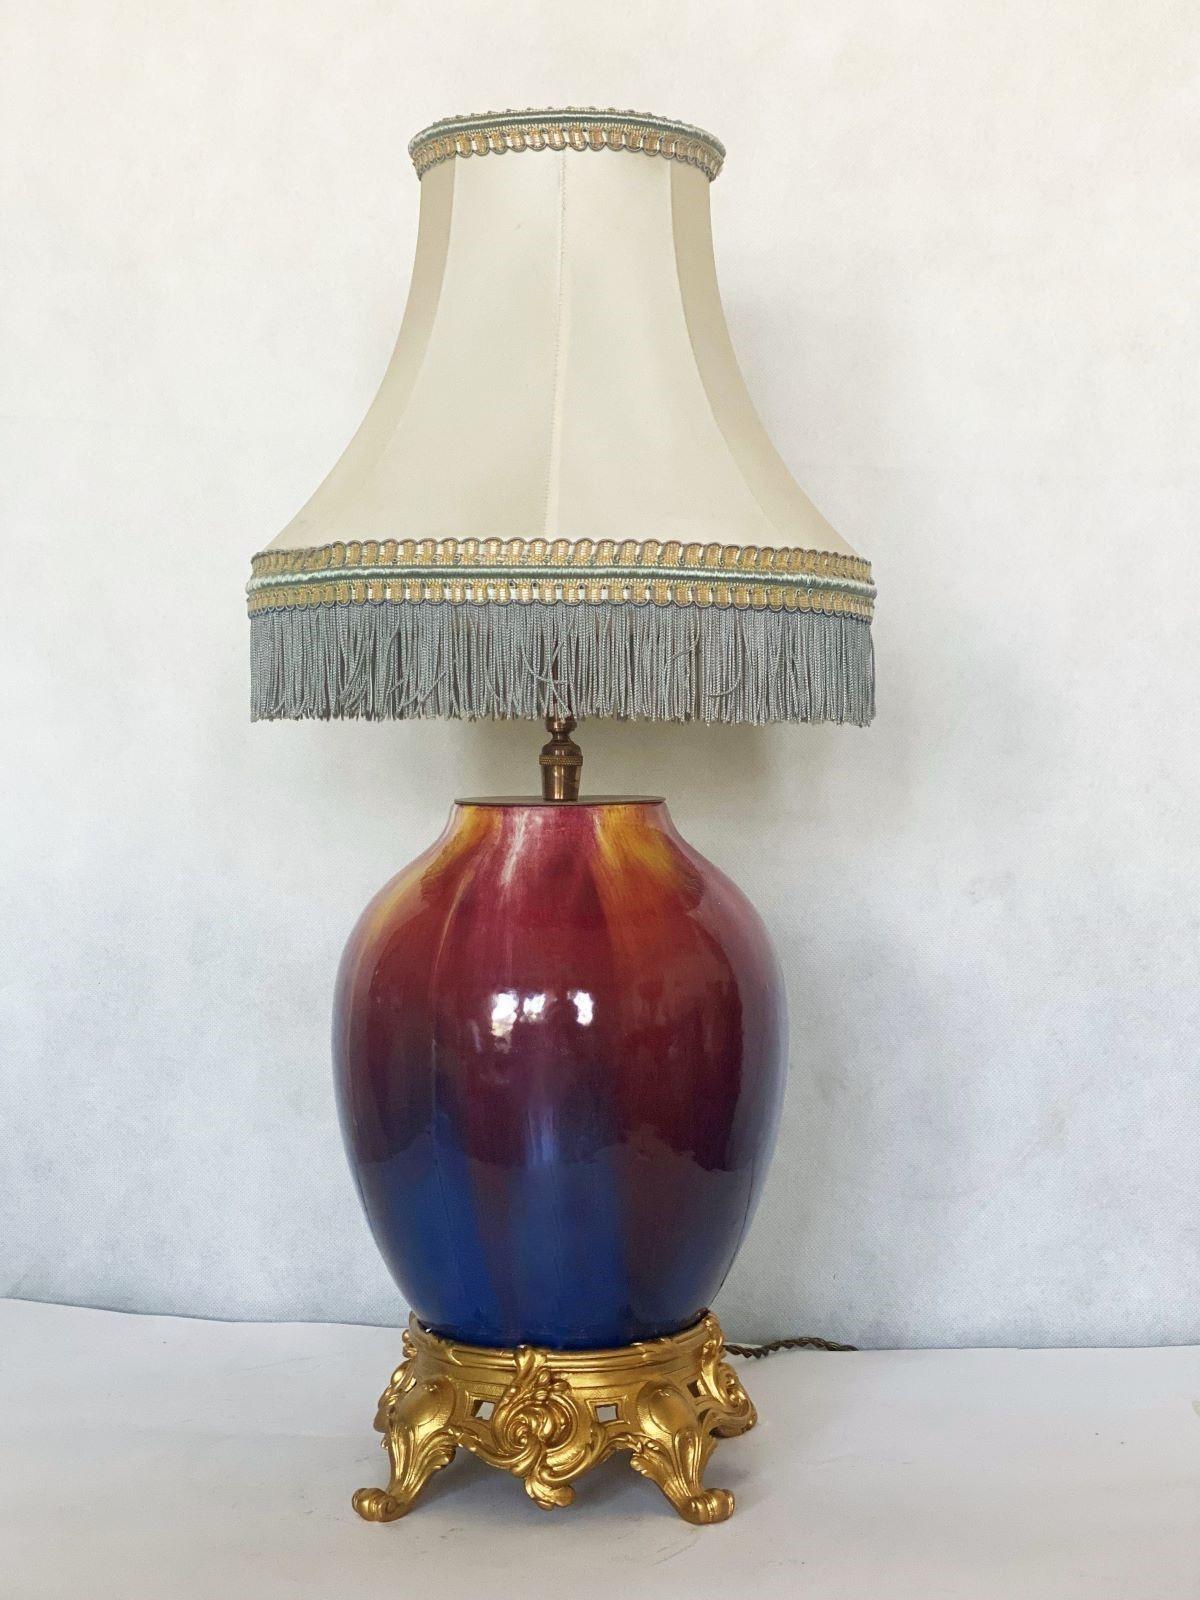 A rare handcrafted ceramic large table lamp, France 1930-1939. Hand-painted and glazed in vibrant colors, original iivory color silk shade with light blue fringes. One light socket for large sized bulb.
Measures: 
Overall height: 21.50